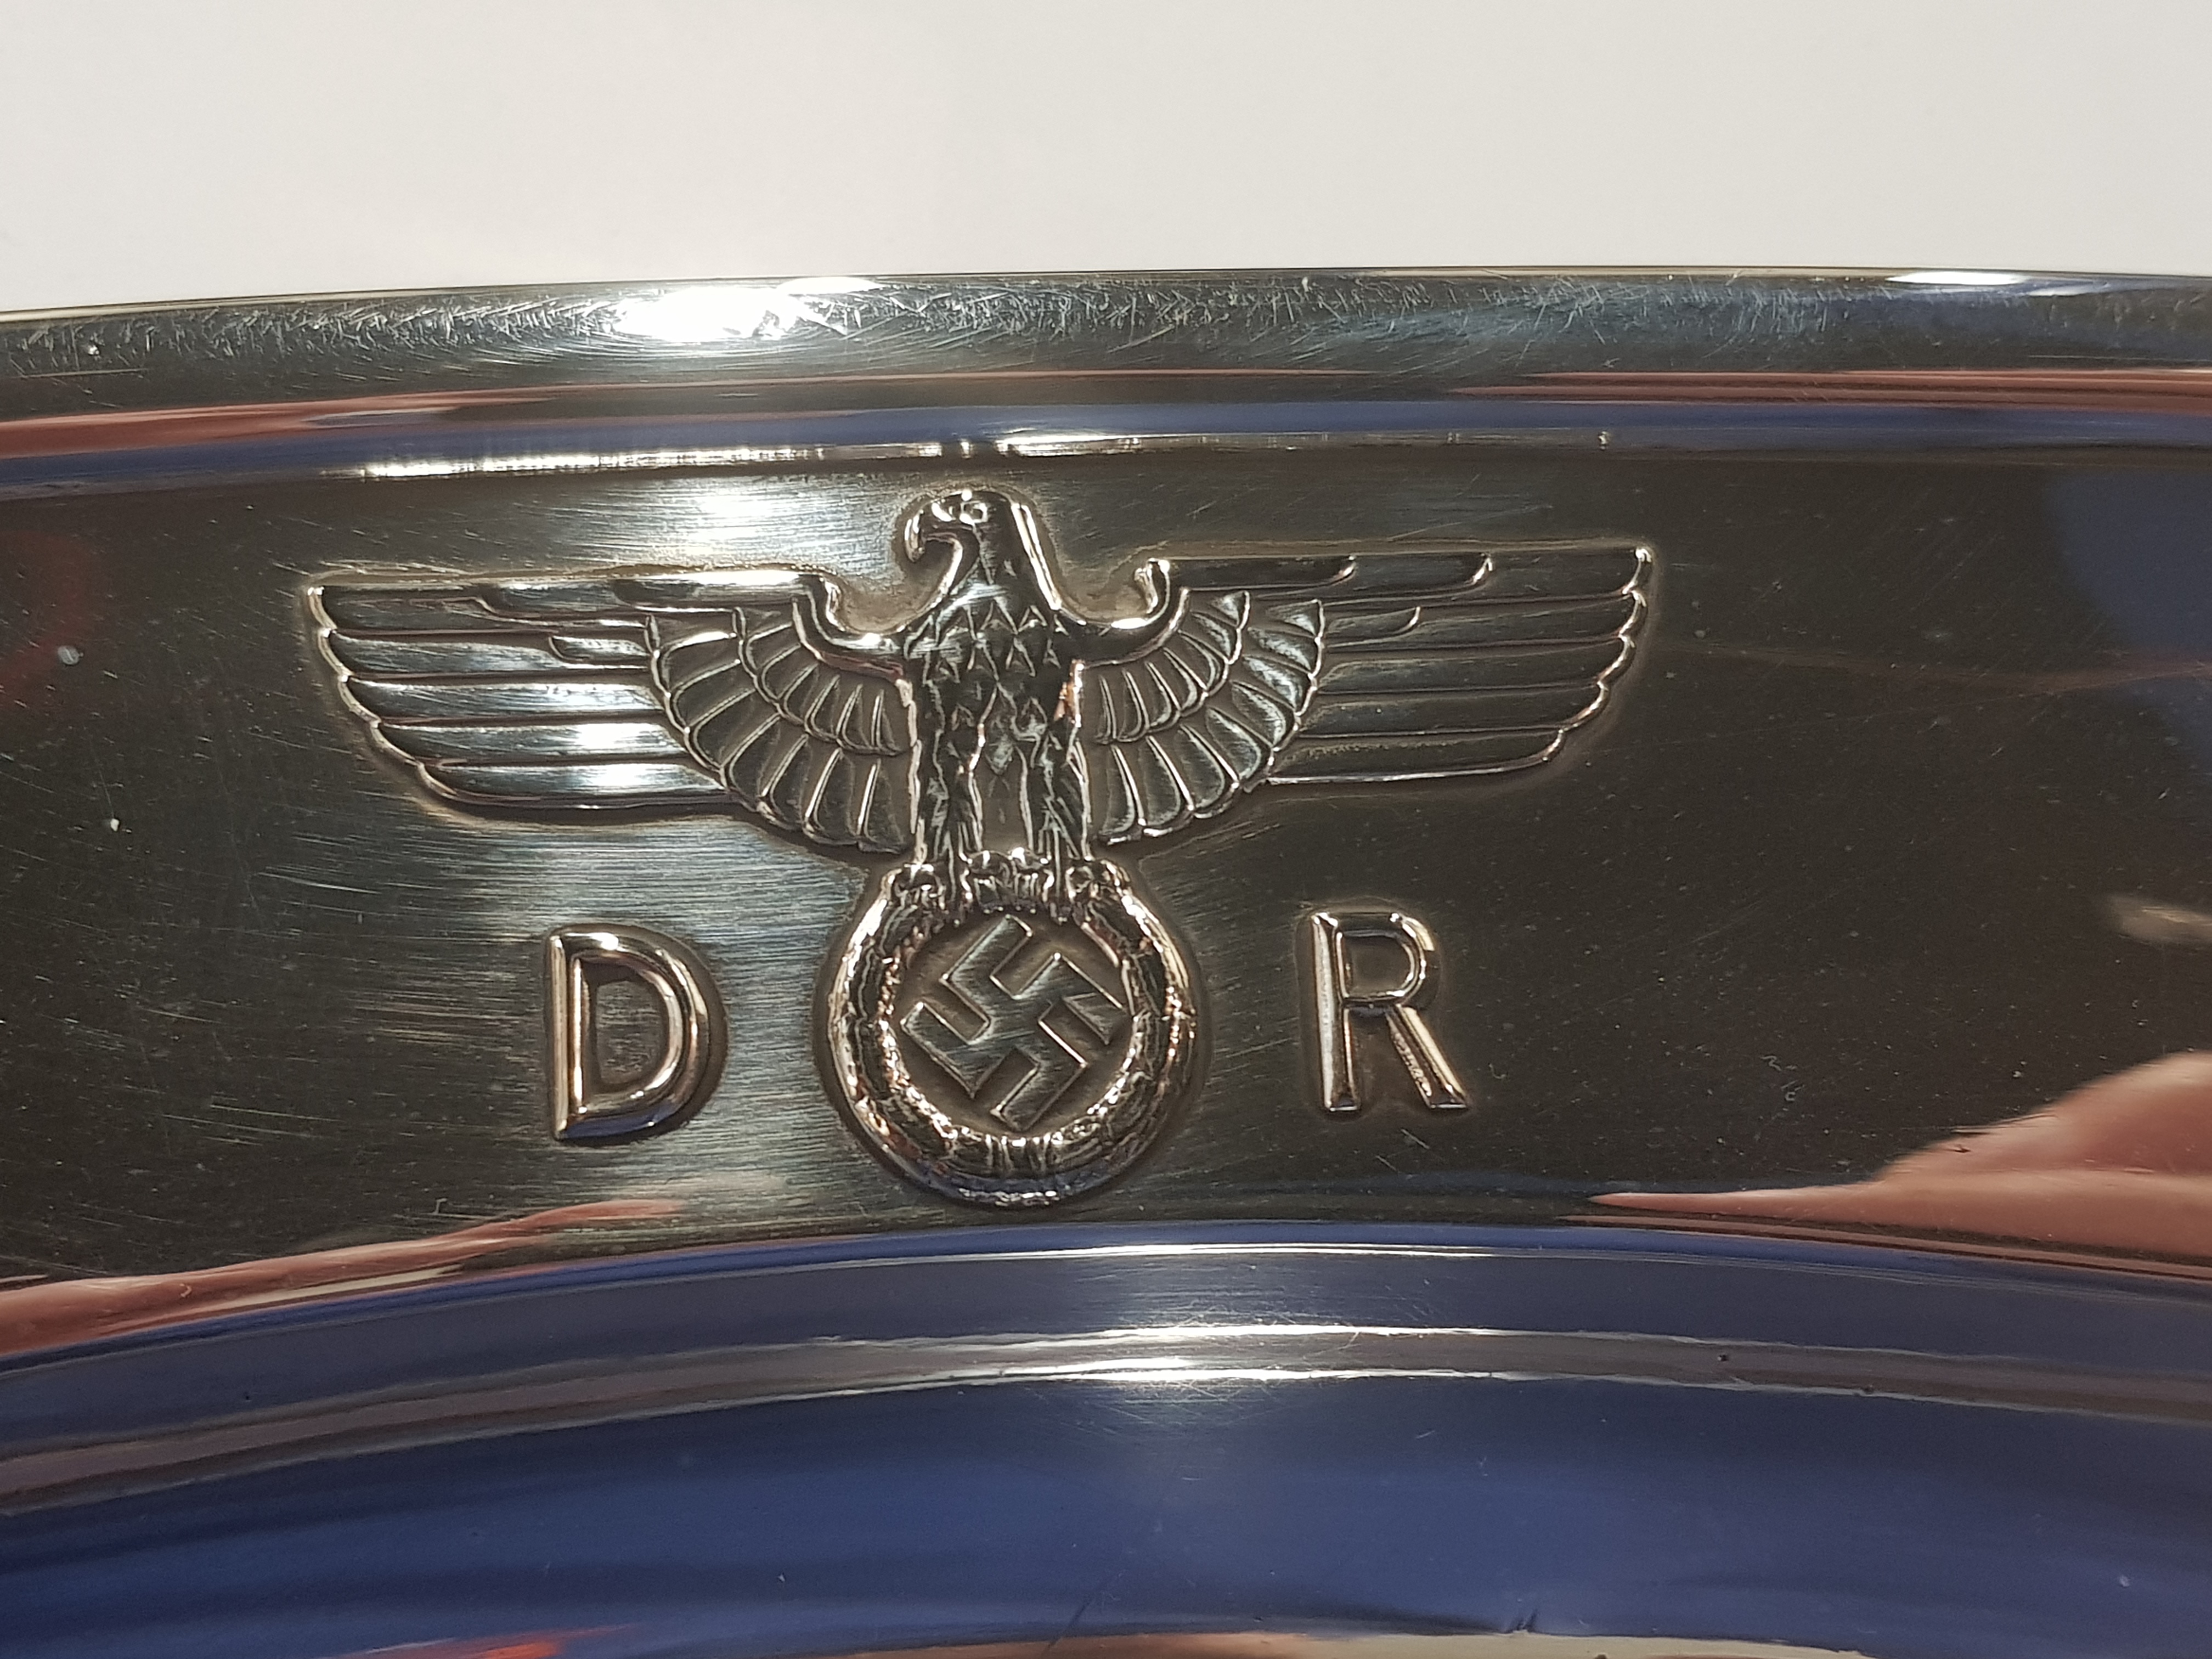 DEUTSCHE REICHSBAHN LARGE OVAL SERVING TRAY FROM ADOLF HITLER'S EXECUTIVE DINING WAGON 10 '242' - Image 2 of 6